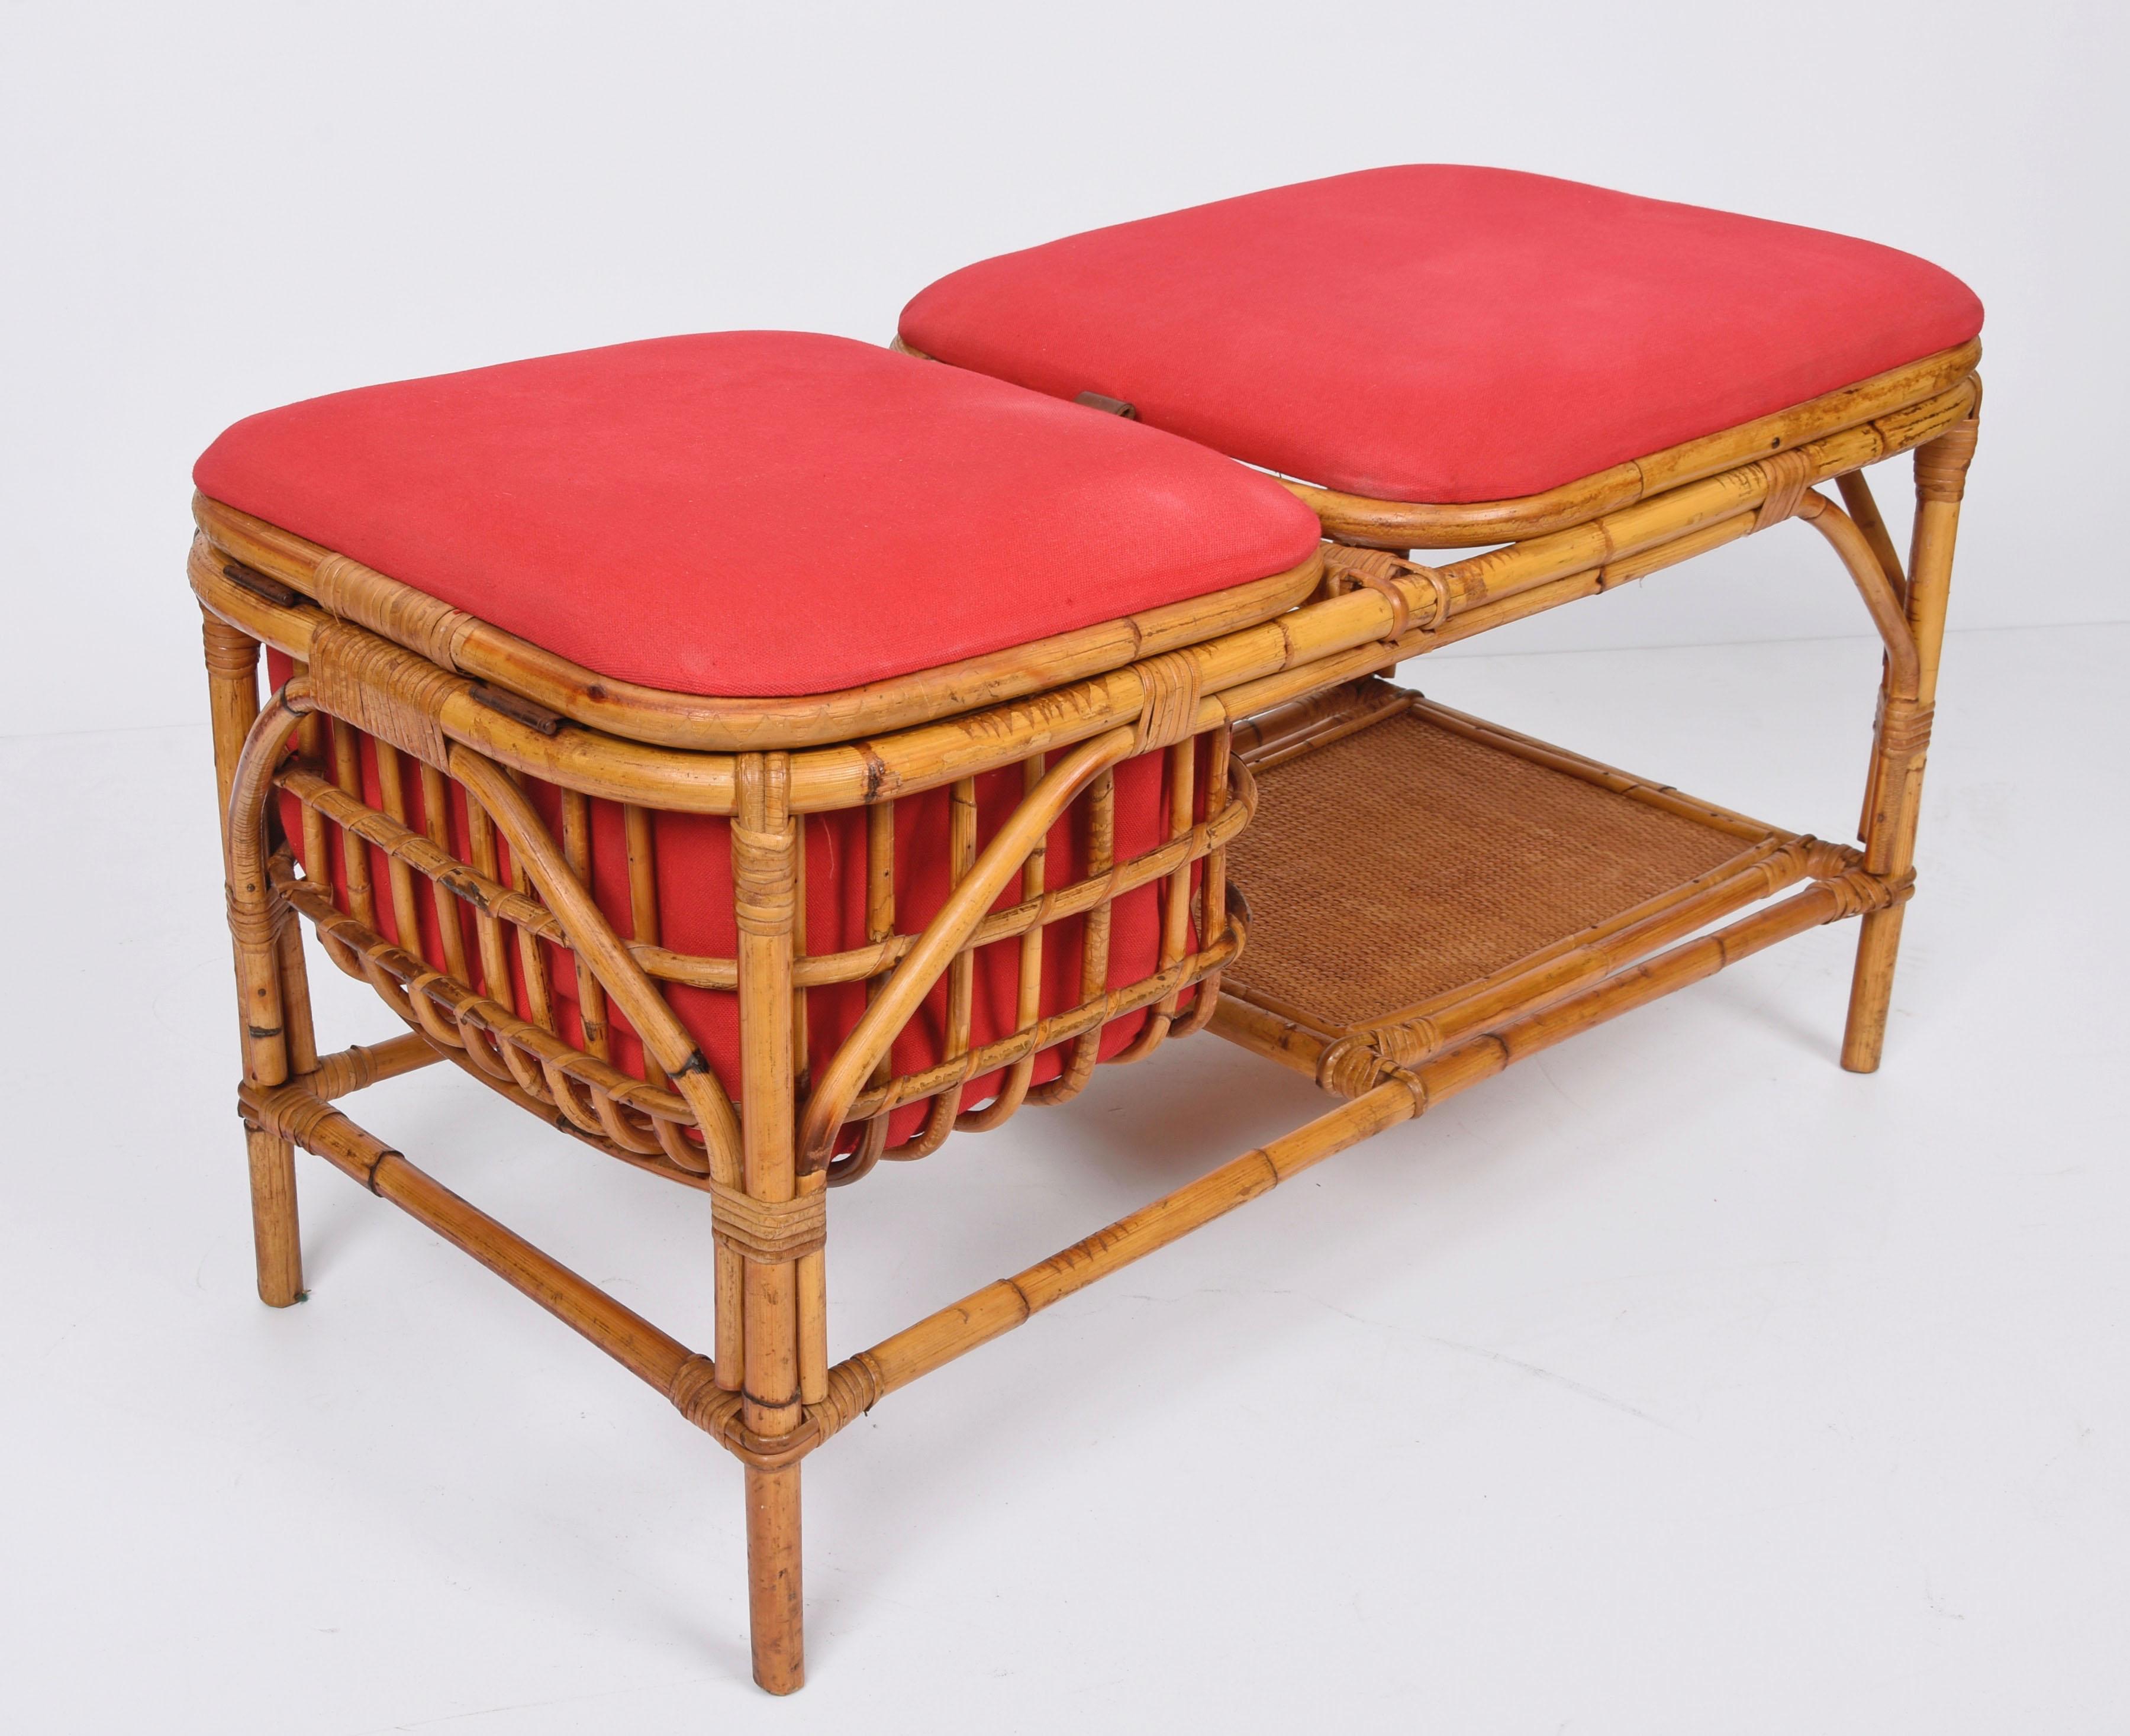 Midcentury Bamboo and Rattan Italian Bench with Box Case, 1950s For Sale 2